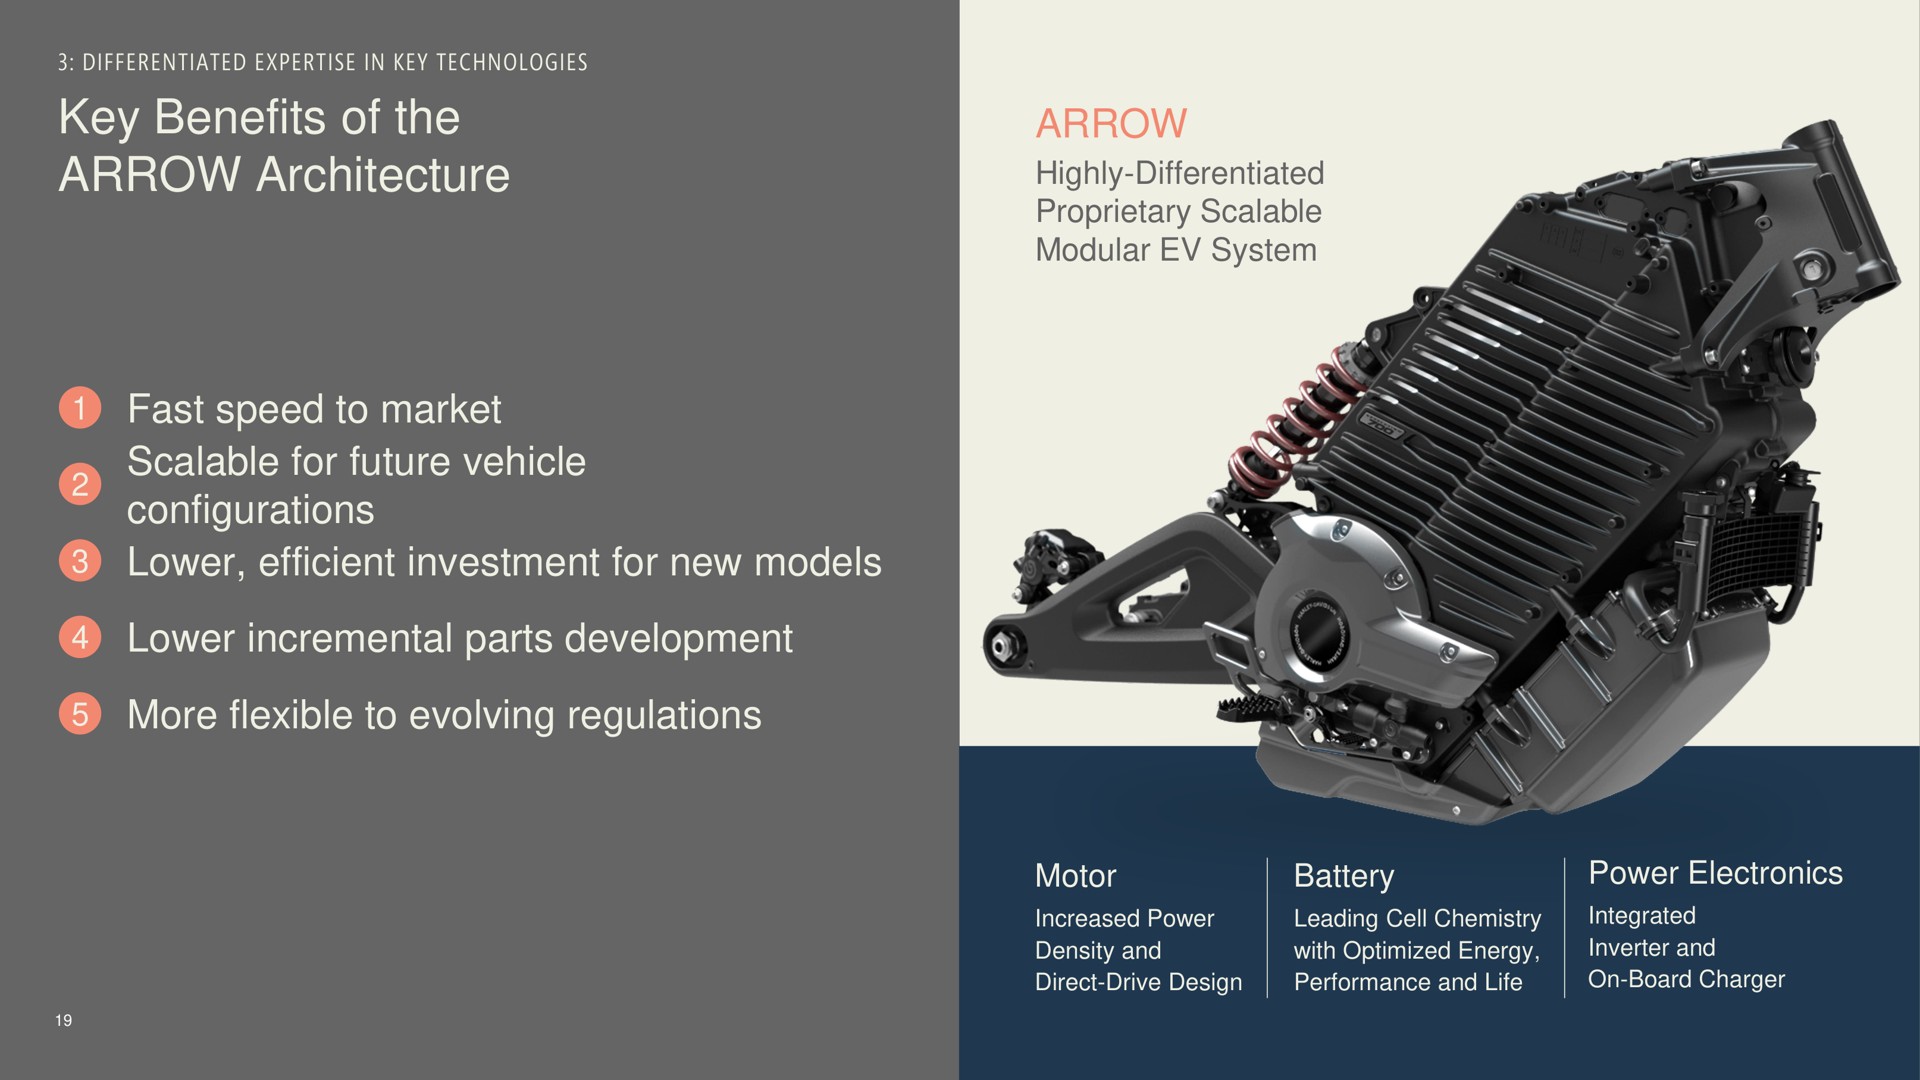 key benefits of the arrow architecture arrow fast speed to market scalable for future vehicle configurations lower efficient investment for new models lower incremental parts development more flexible to evolving regulations highly differentiated | Harley Davidson